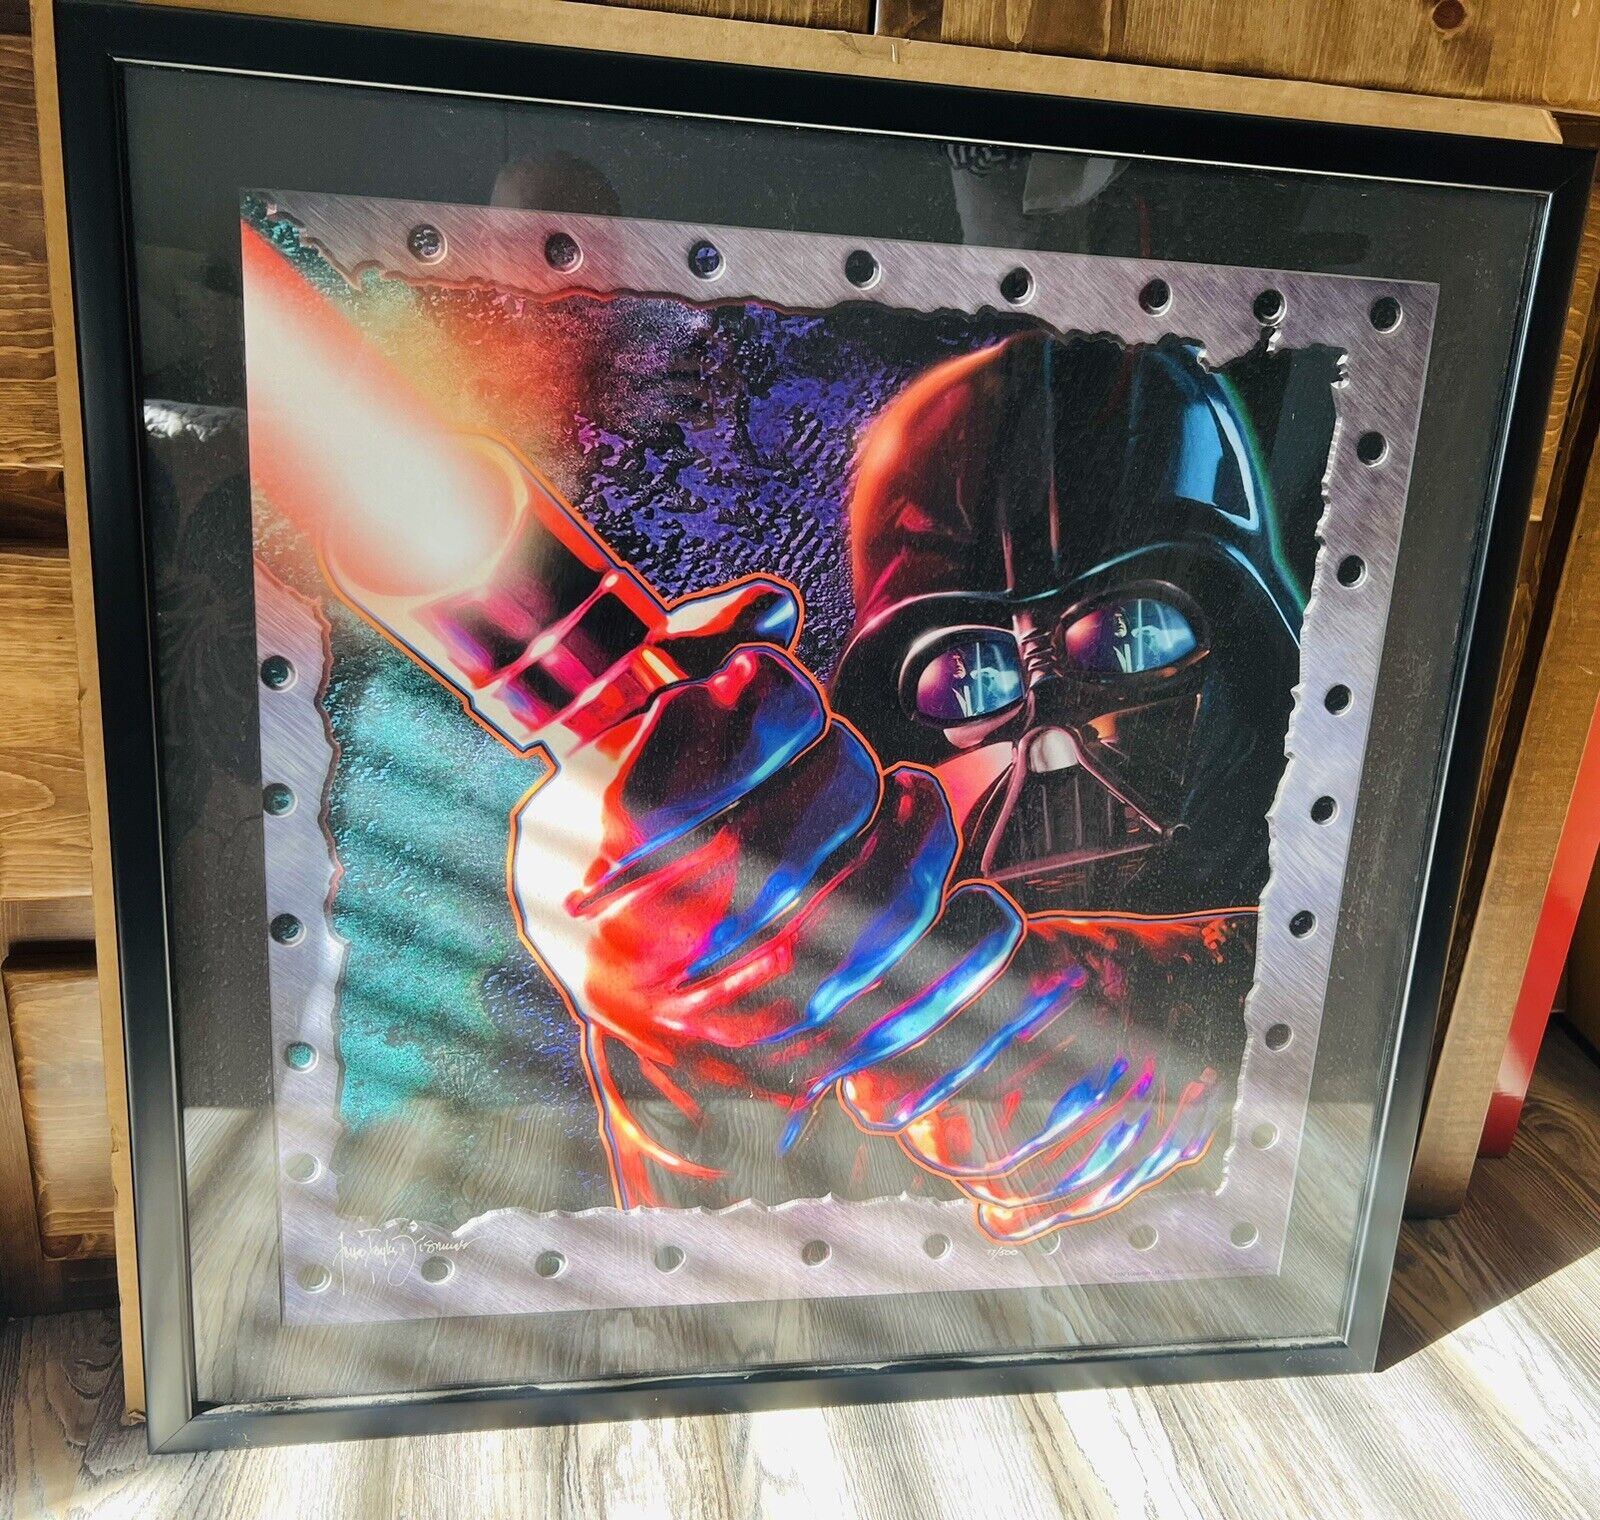 ( Best Offer ) Rare Collectible  Star Wars Darth Vader Print Limited 500 Copies